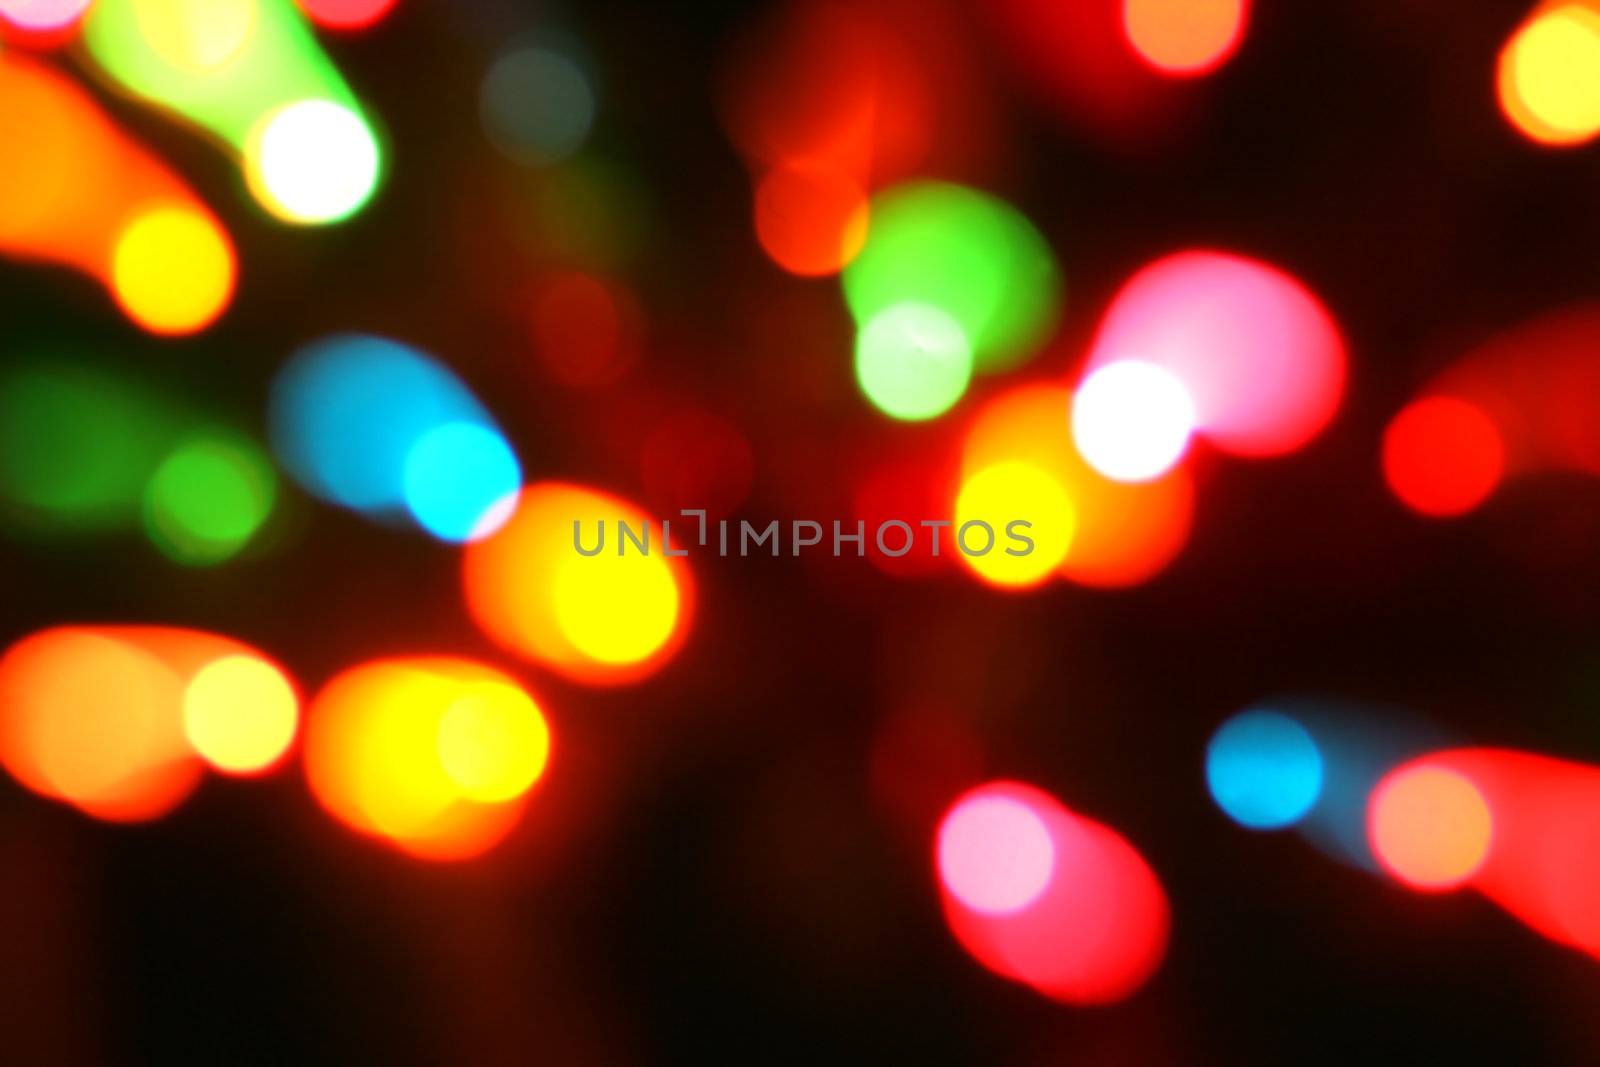 Abstract of holiday lights with an in camera zoom effect.